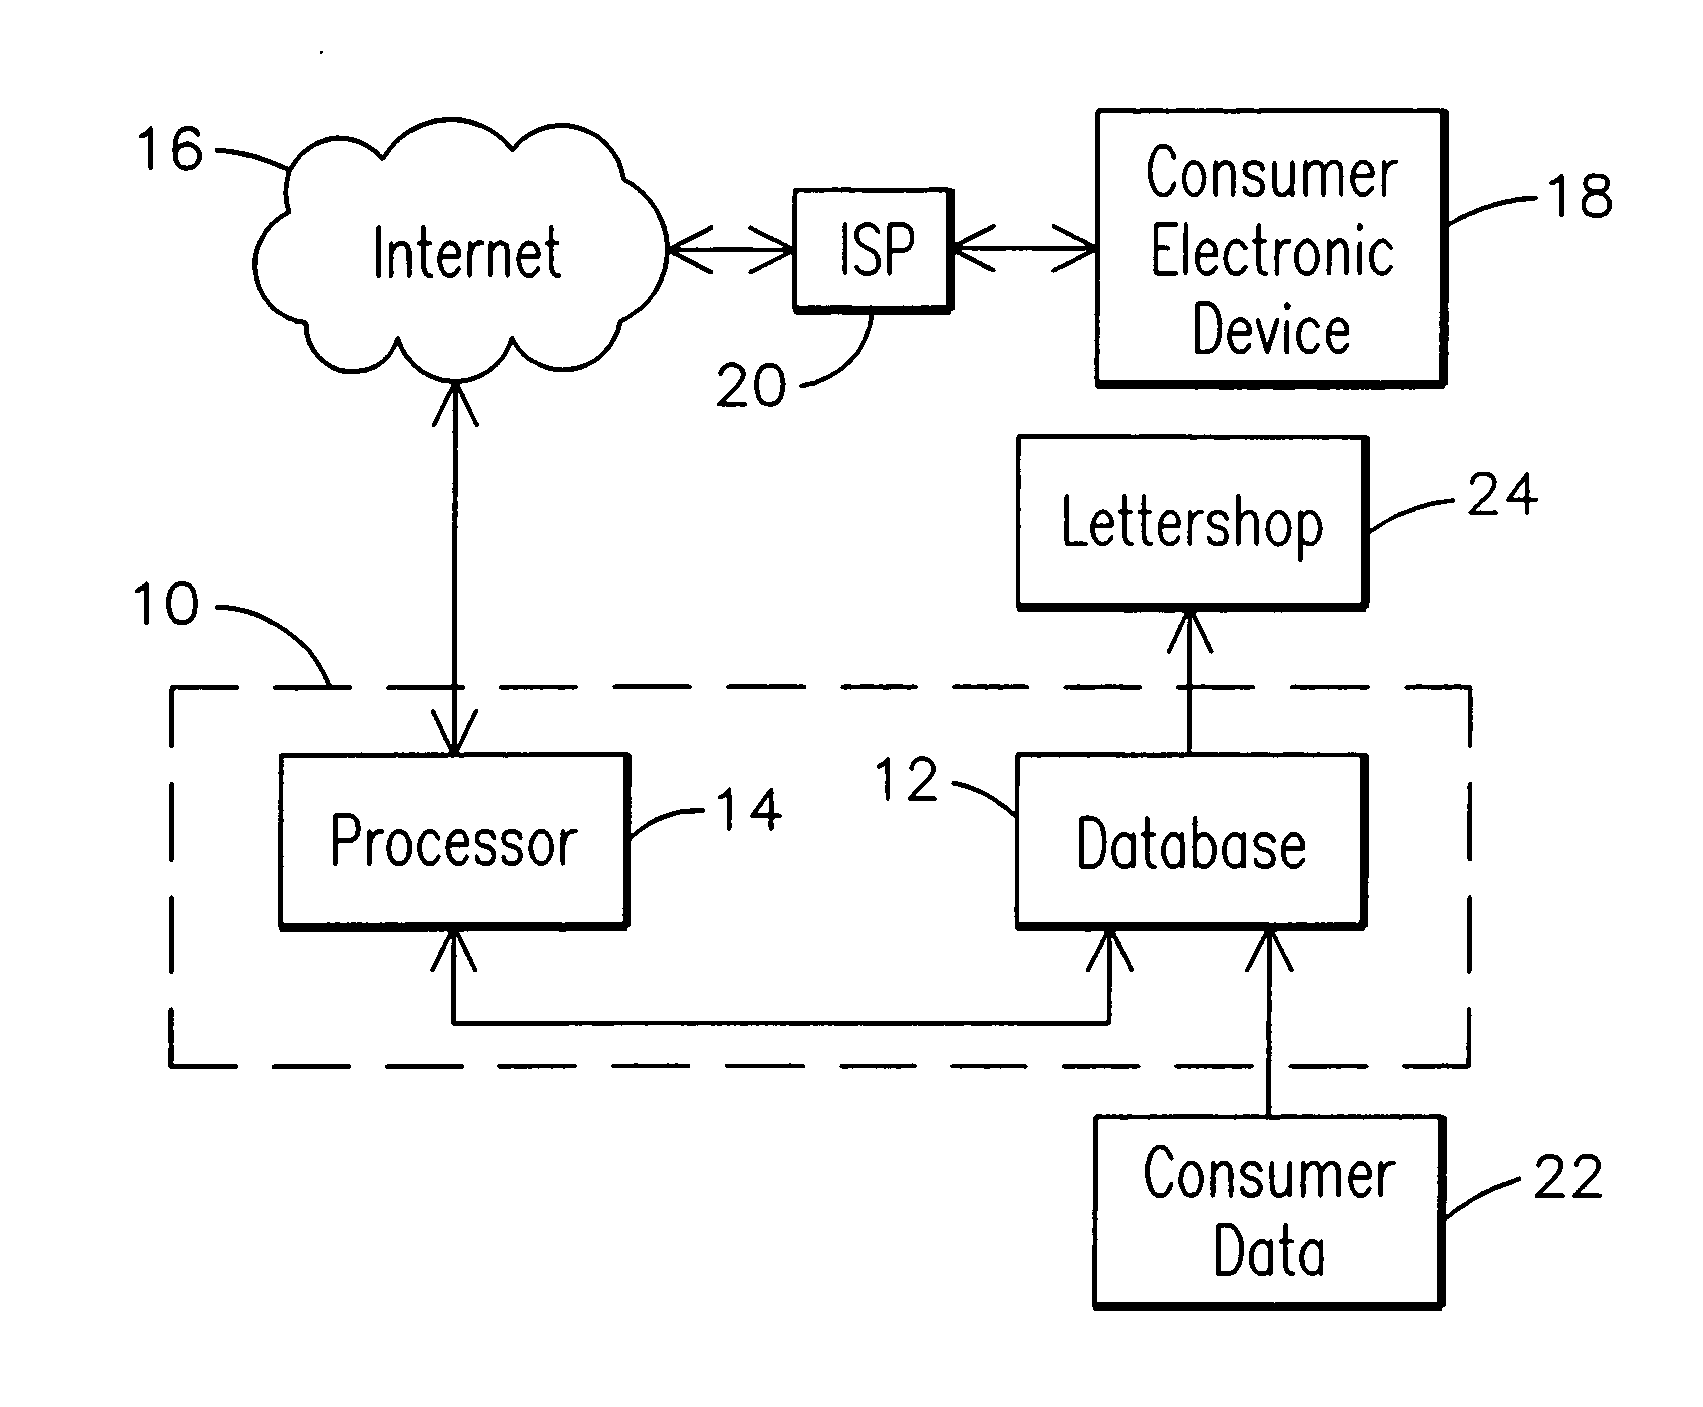 Computerized method for the solicitation and sales of transactions